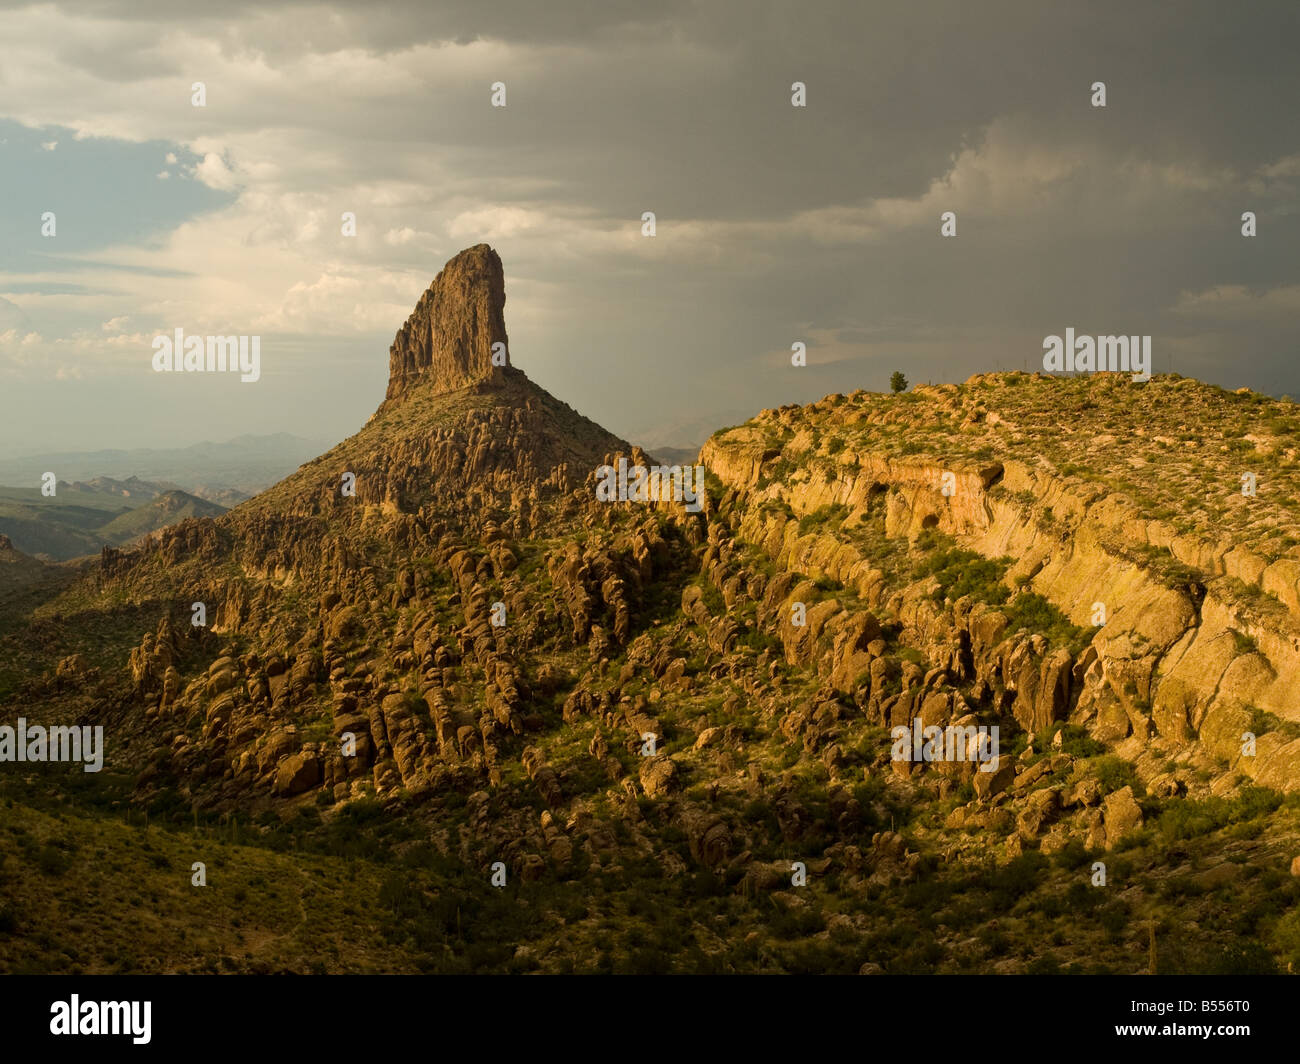 Weavers Needle, Superstition mountains during evening monsoon. Stock Photo